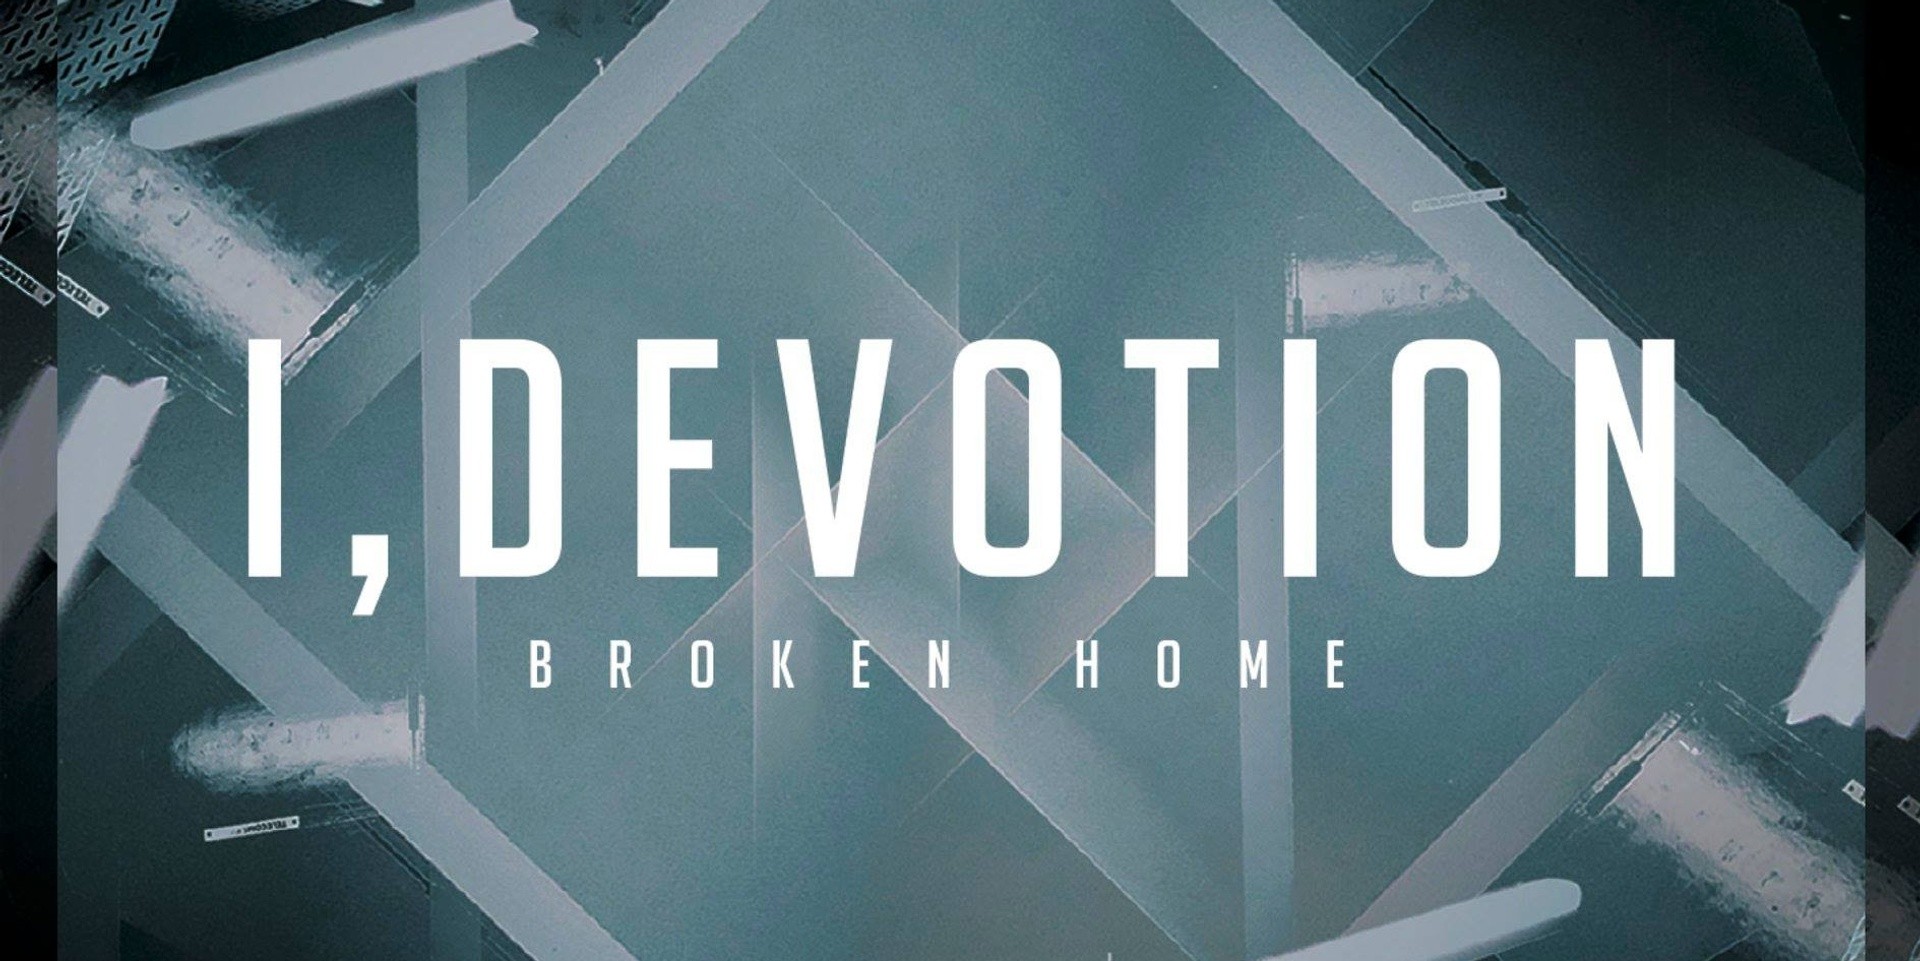 I, Devotion releases long-awaited EP, Broken Home, along with music video for 'House without a Name' and 'Unwanted Souls' - watch